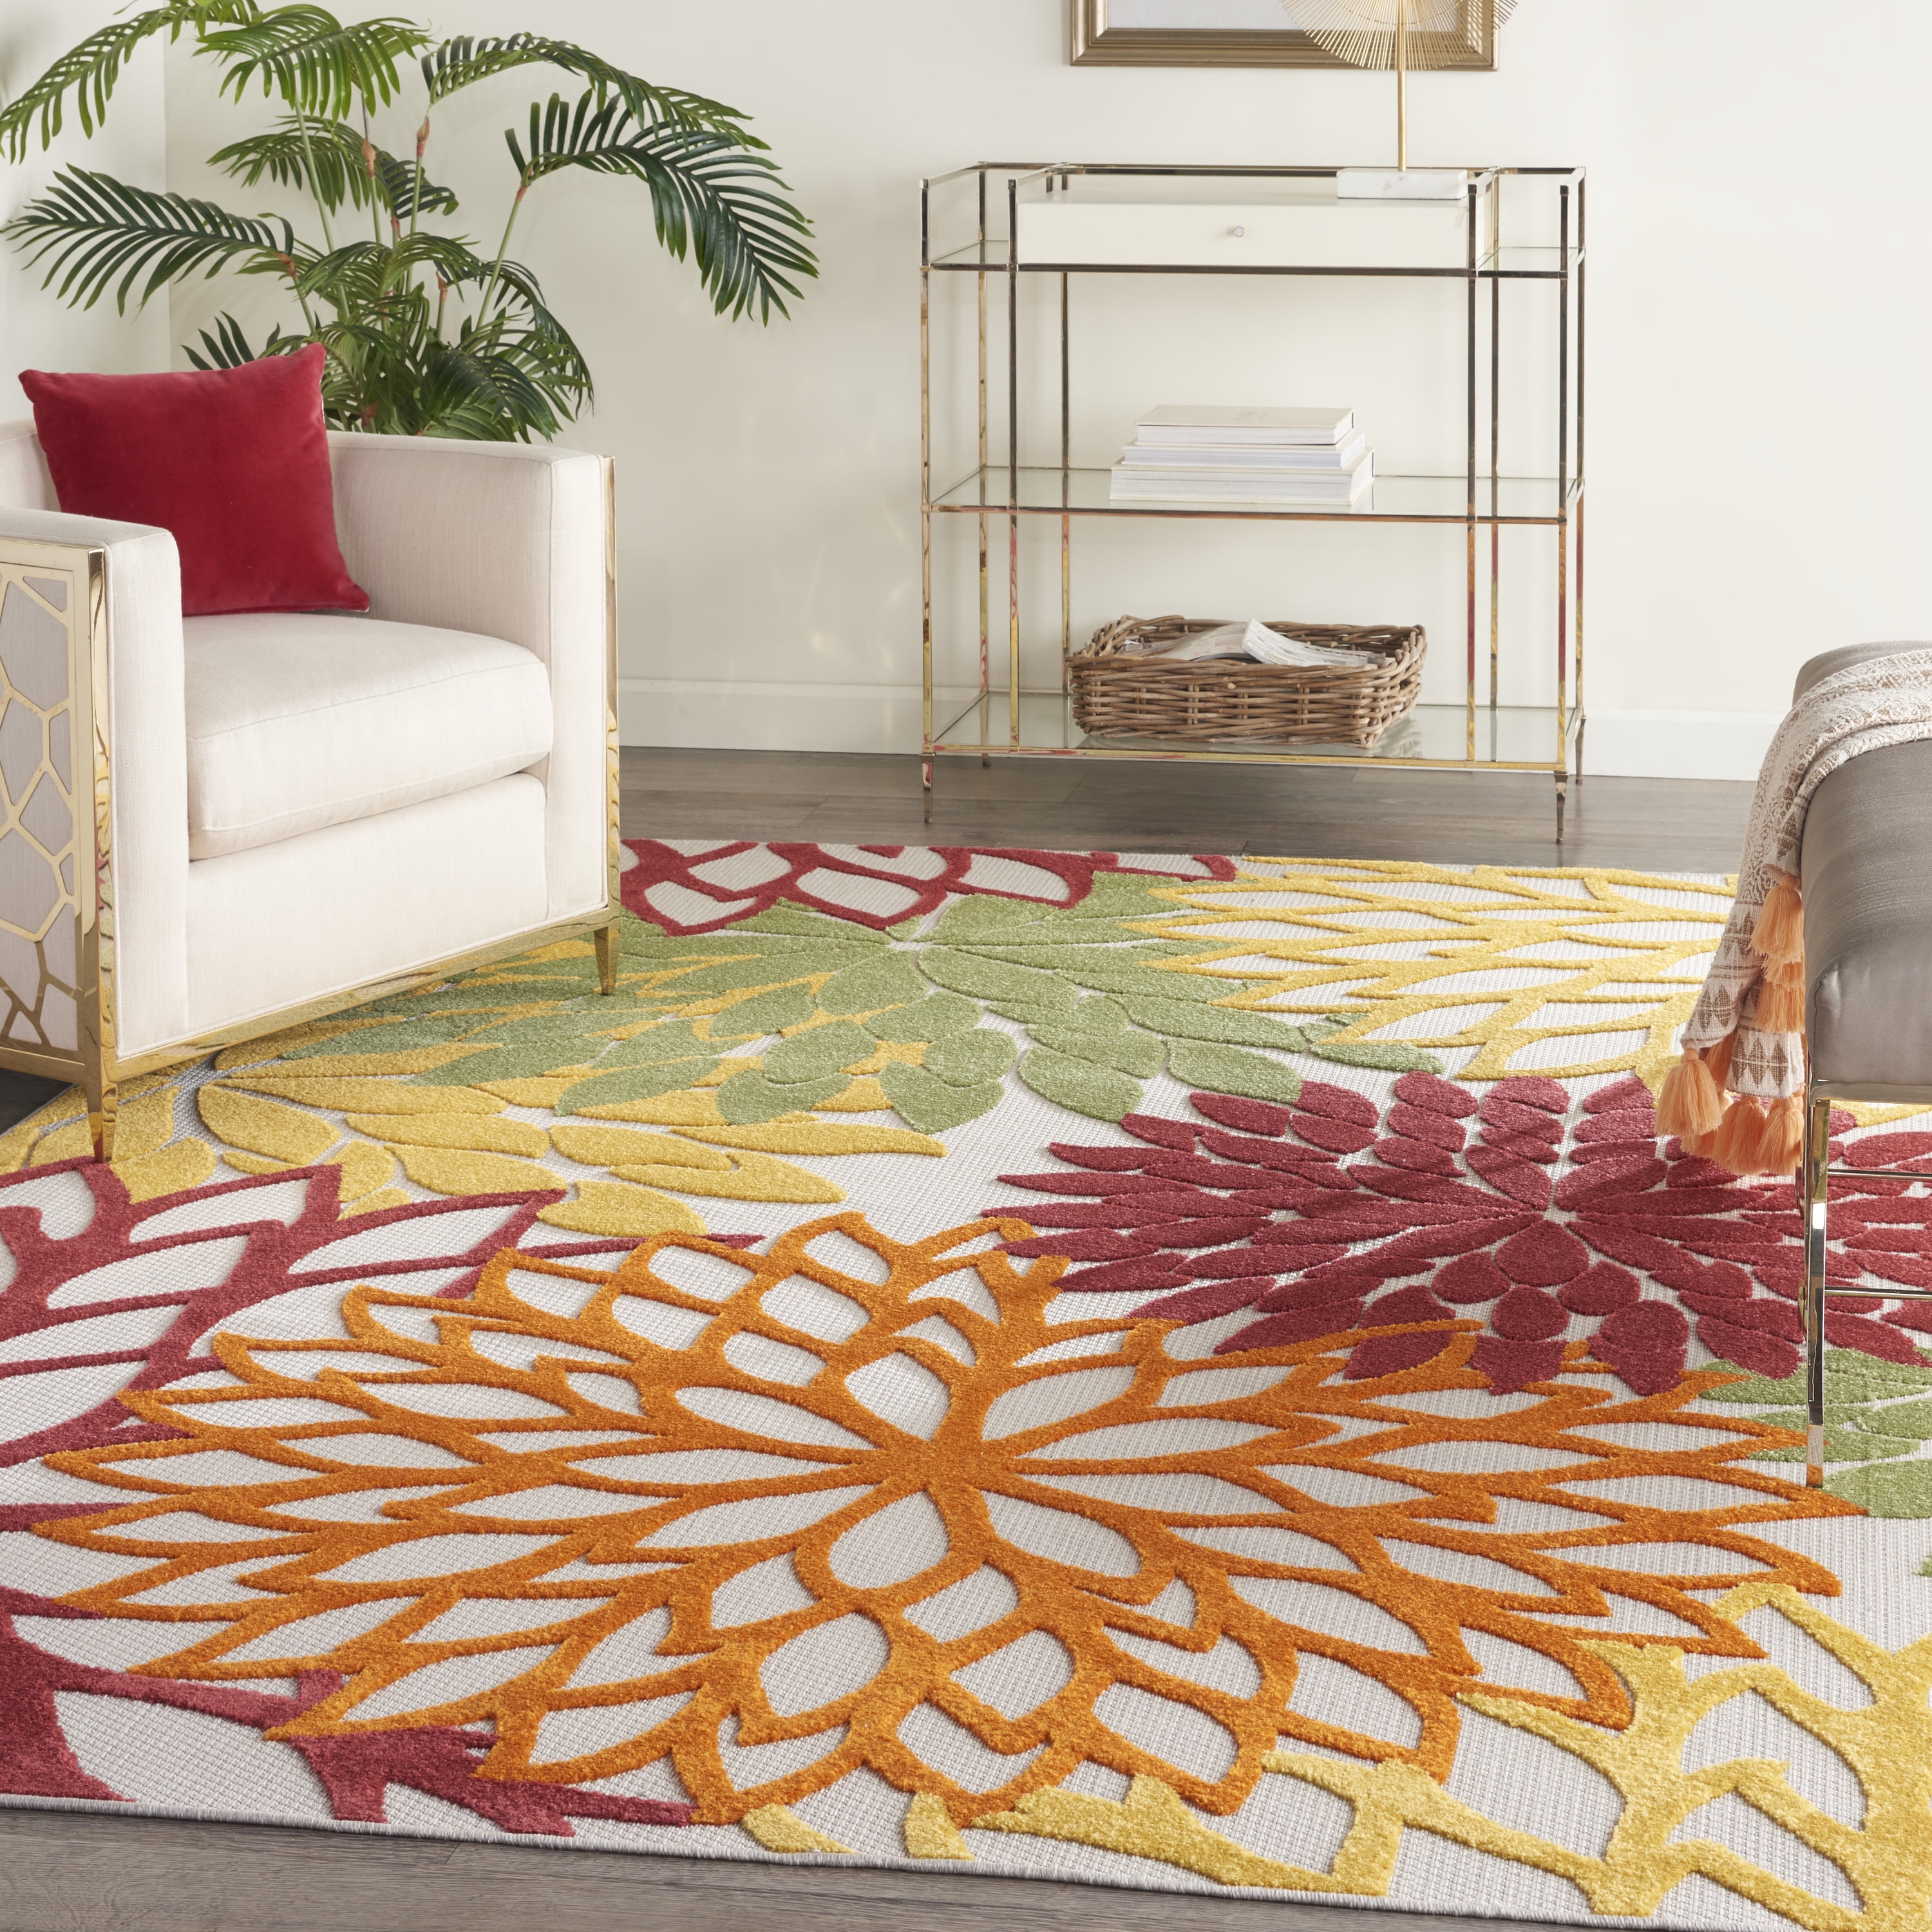 Indoor outdoor rugs MODERN LARGE PATIO MULTI YELLOW GREY COLOR Tropics Rugs 